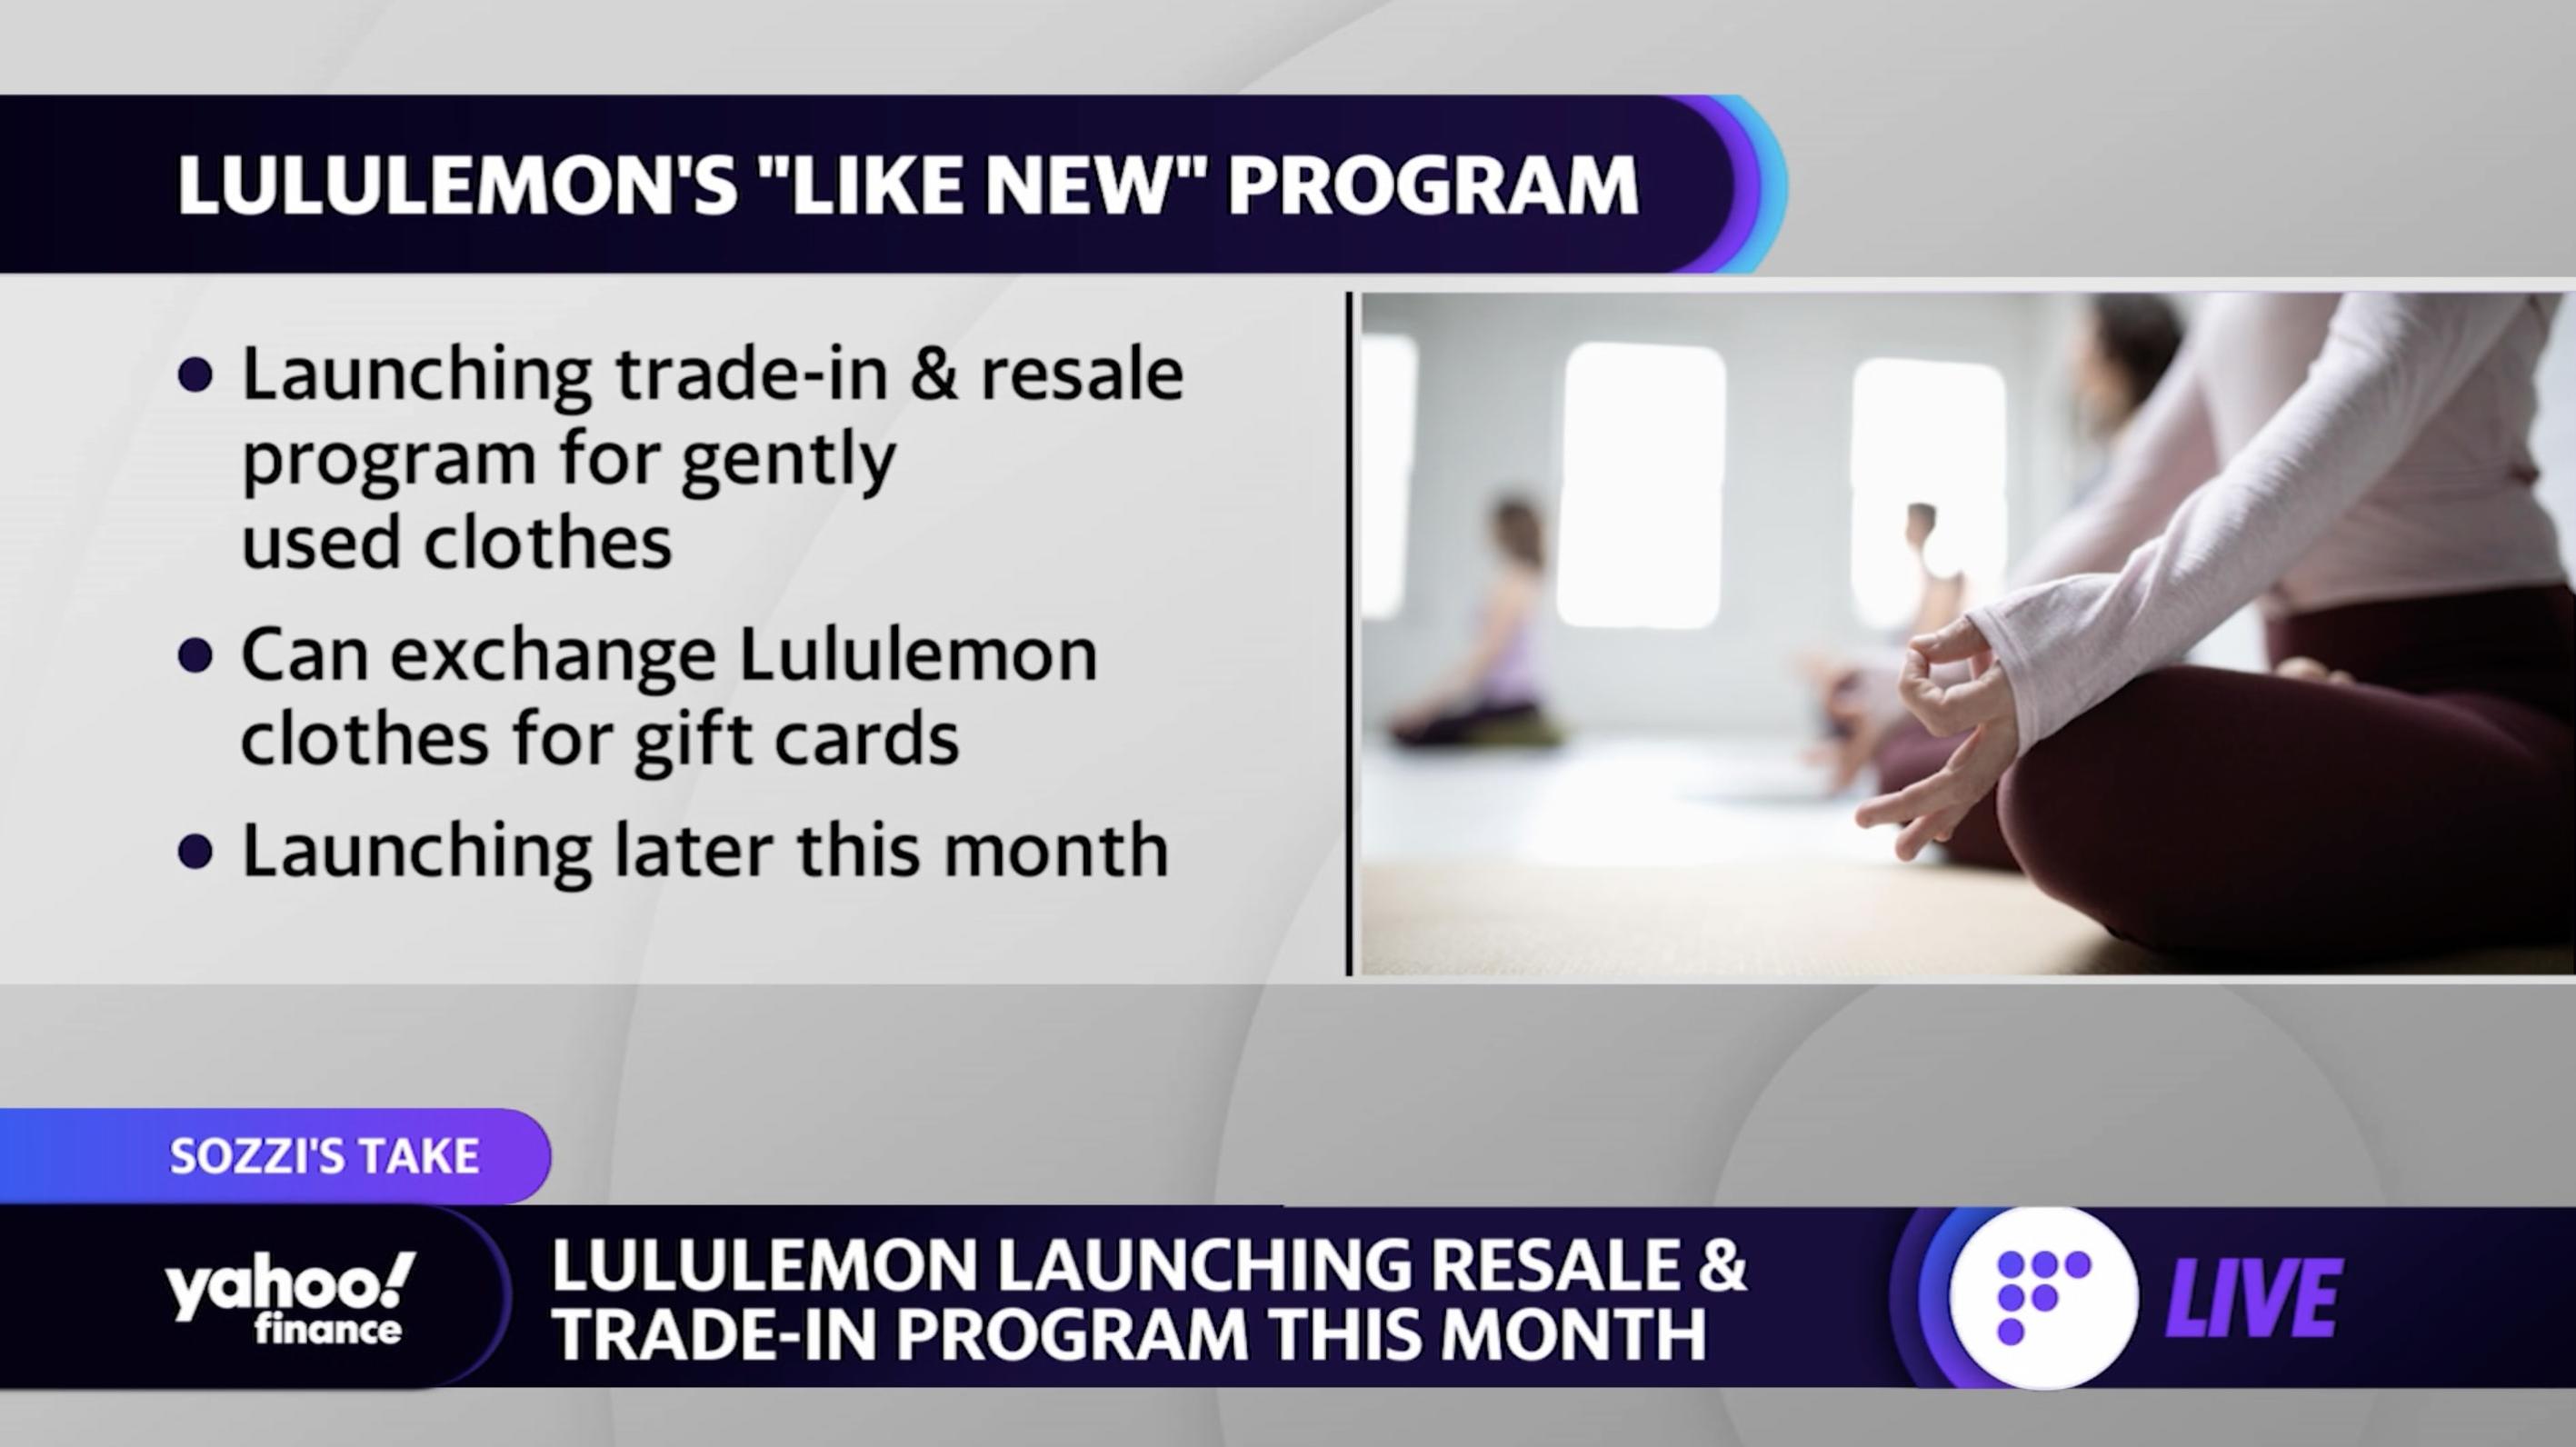 Lululemon just launched Like New, a trade-in and resale program